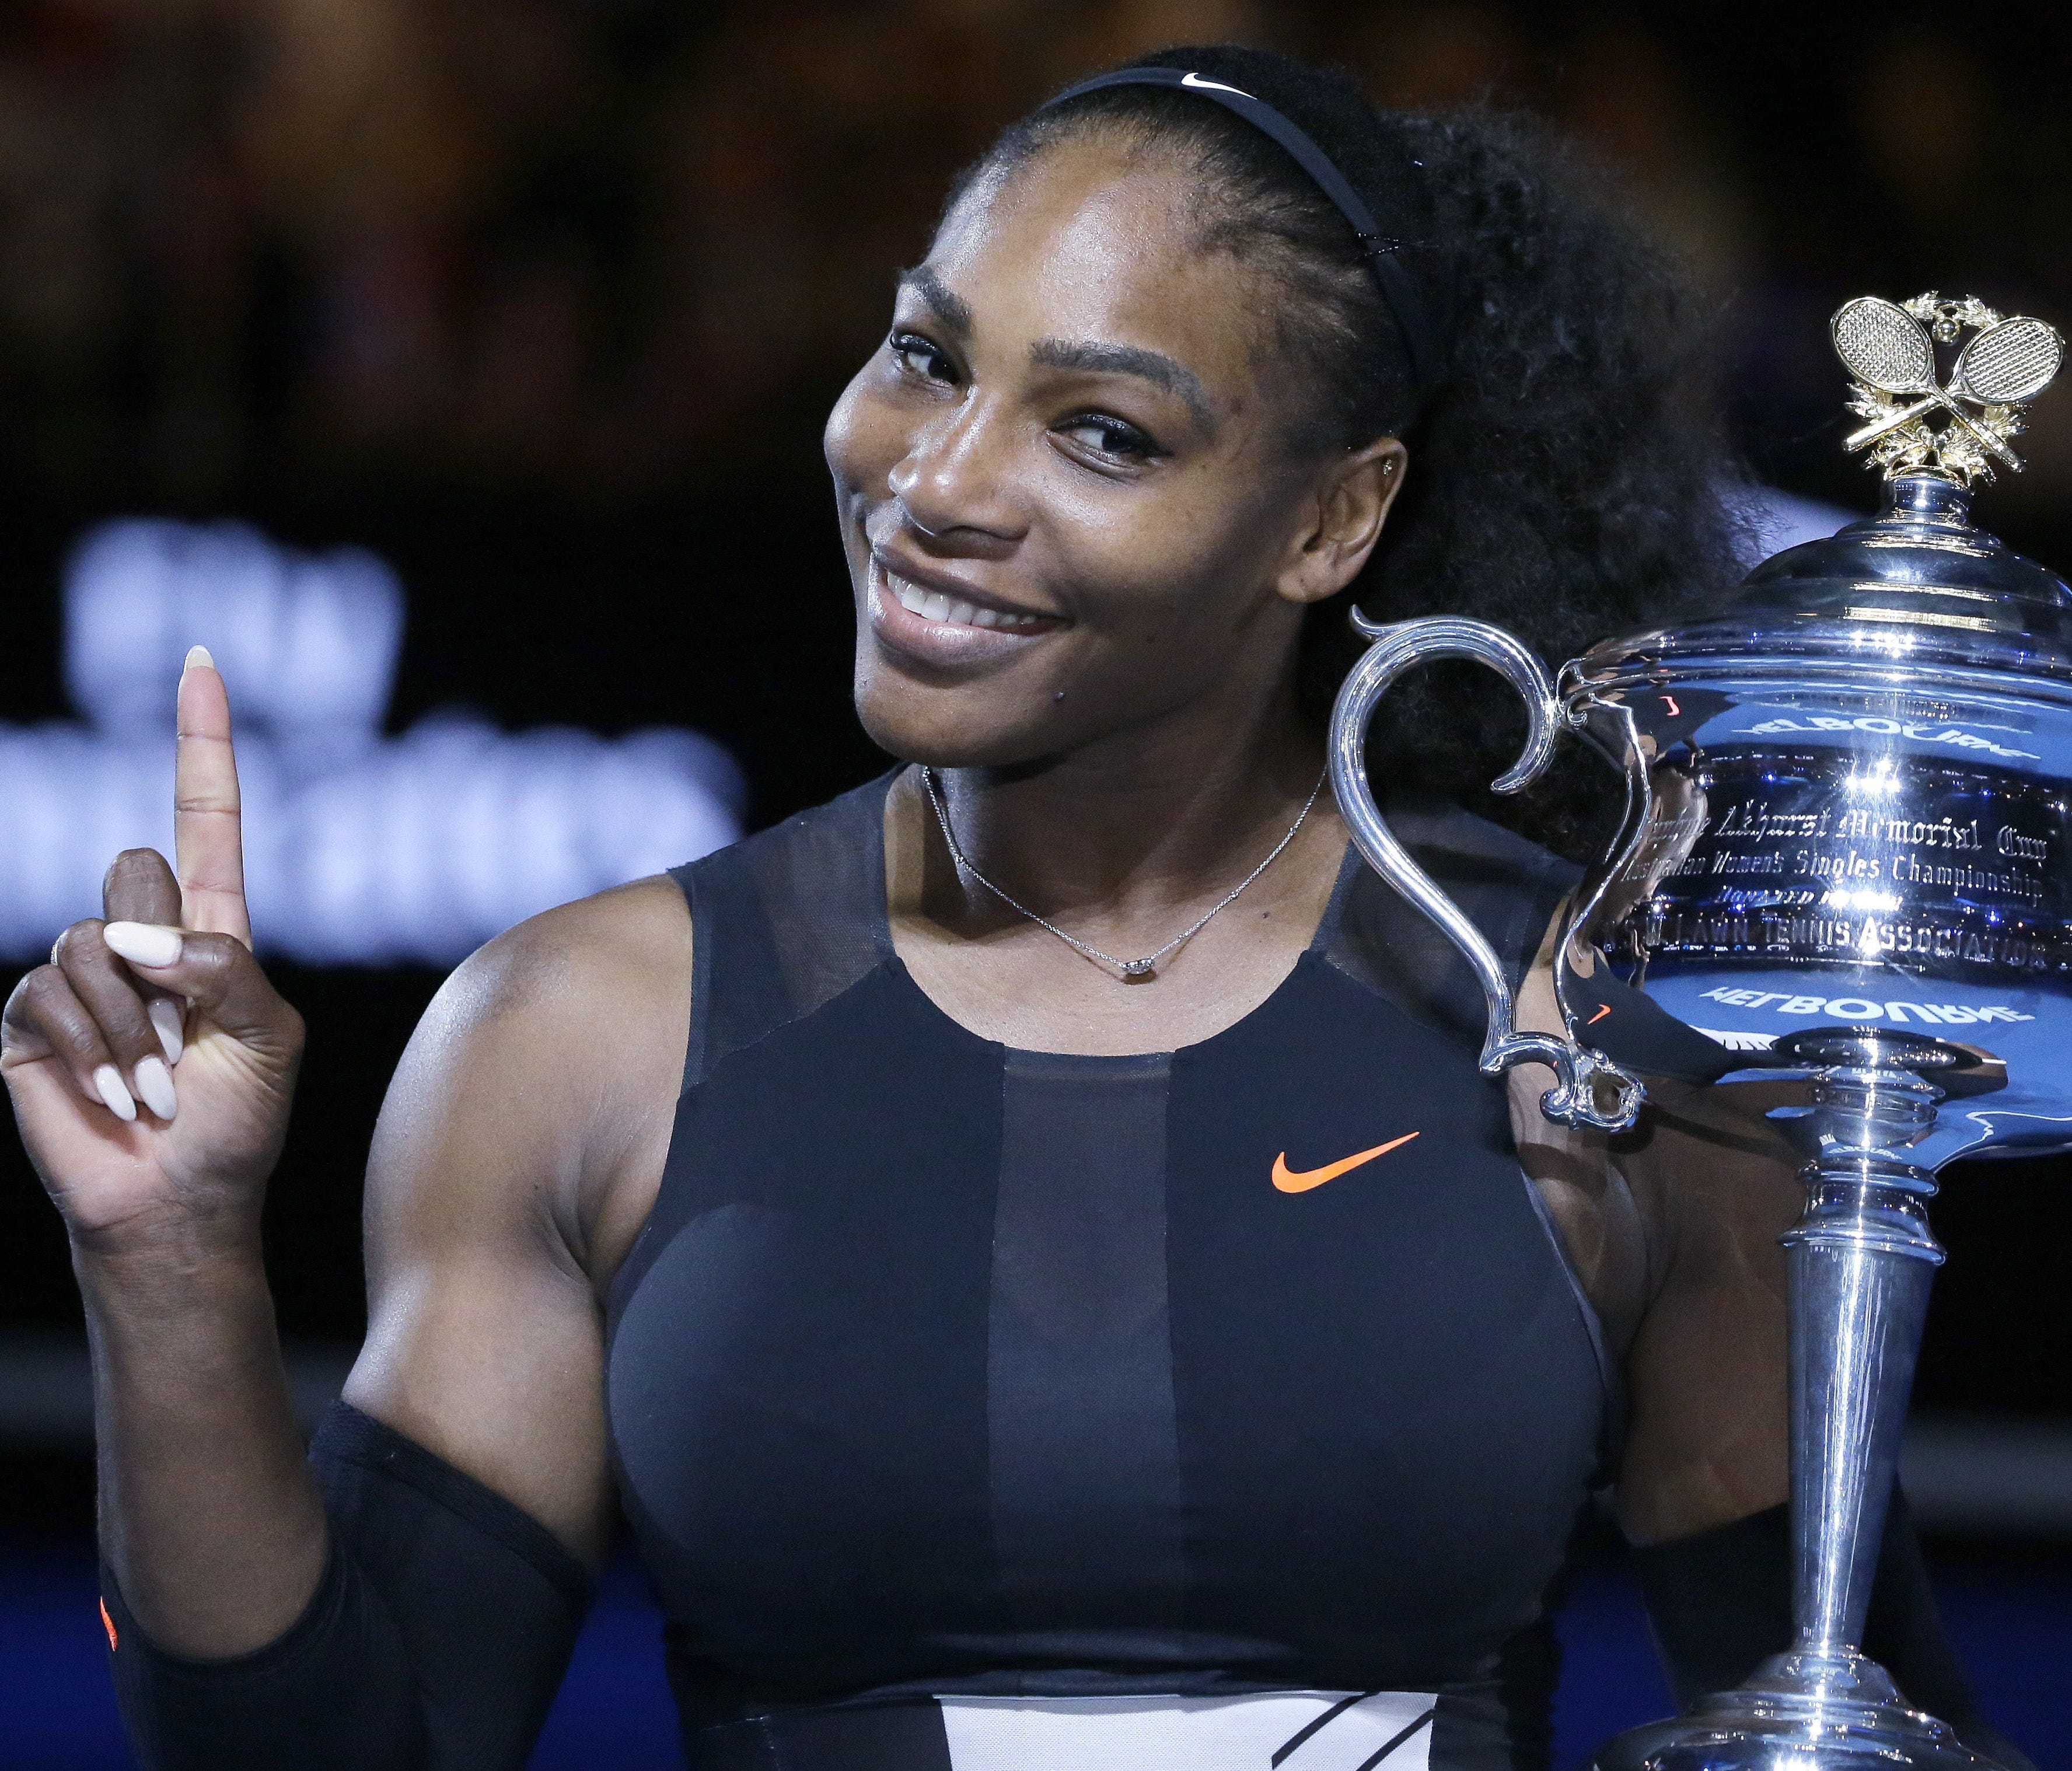 Serena Williams holds up a finger and her trophy after defeating her sister, Venus, in the women's singles final at the Australian Open tennis championships in Melbourne, Australia, on January 28.